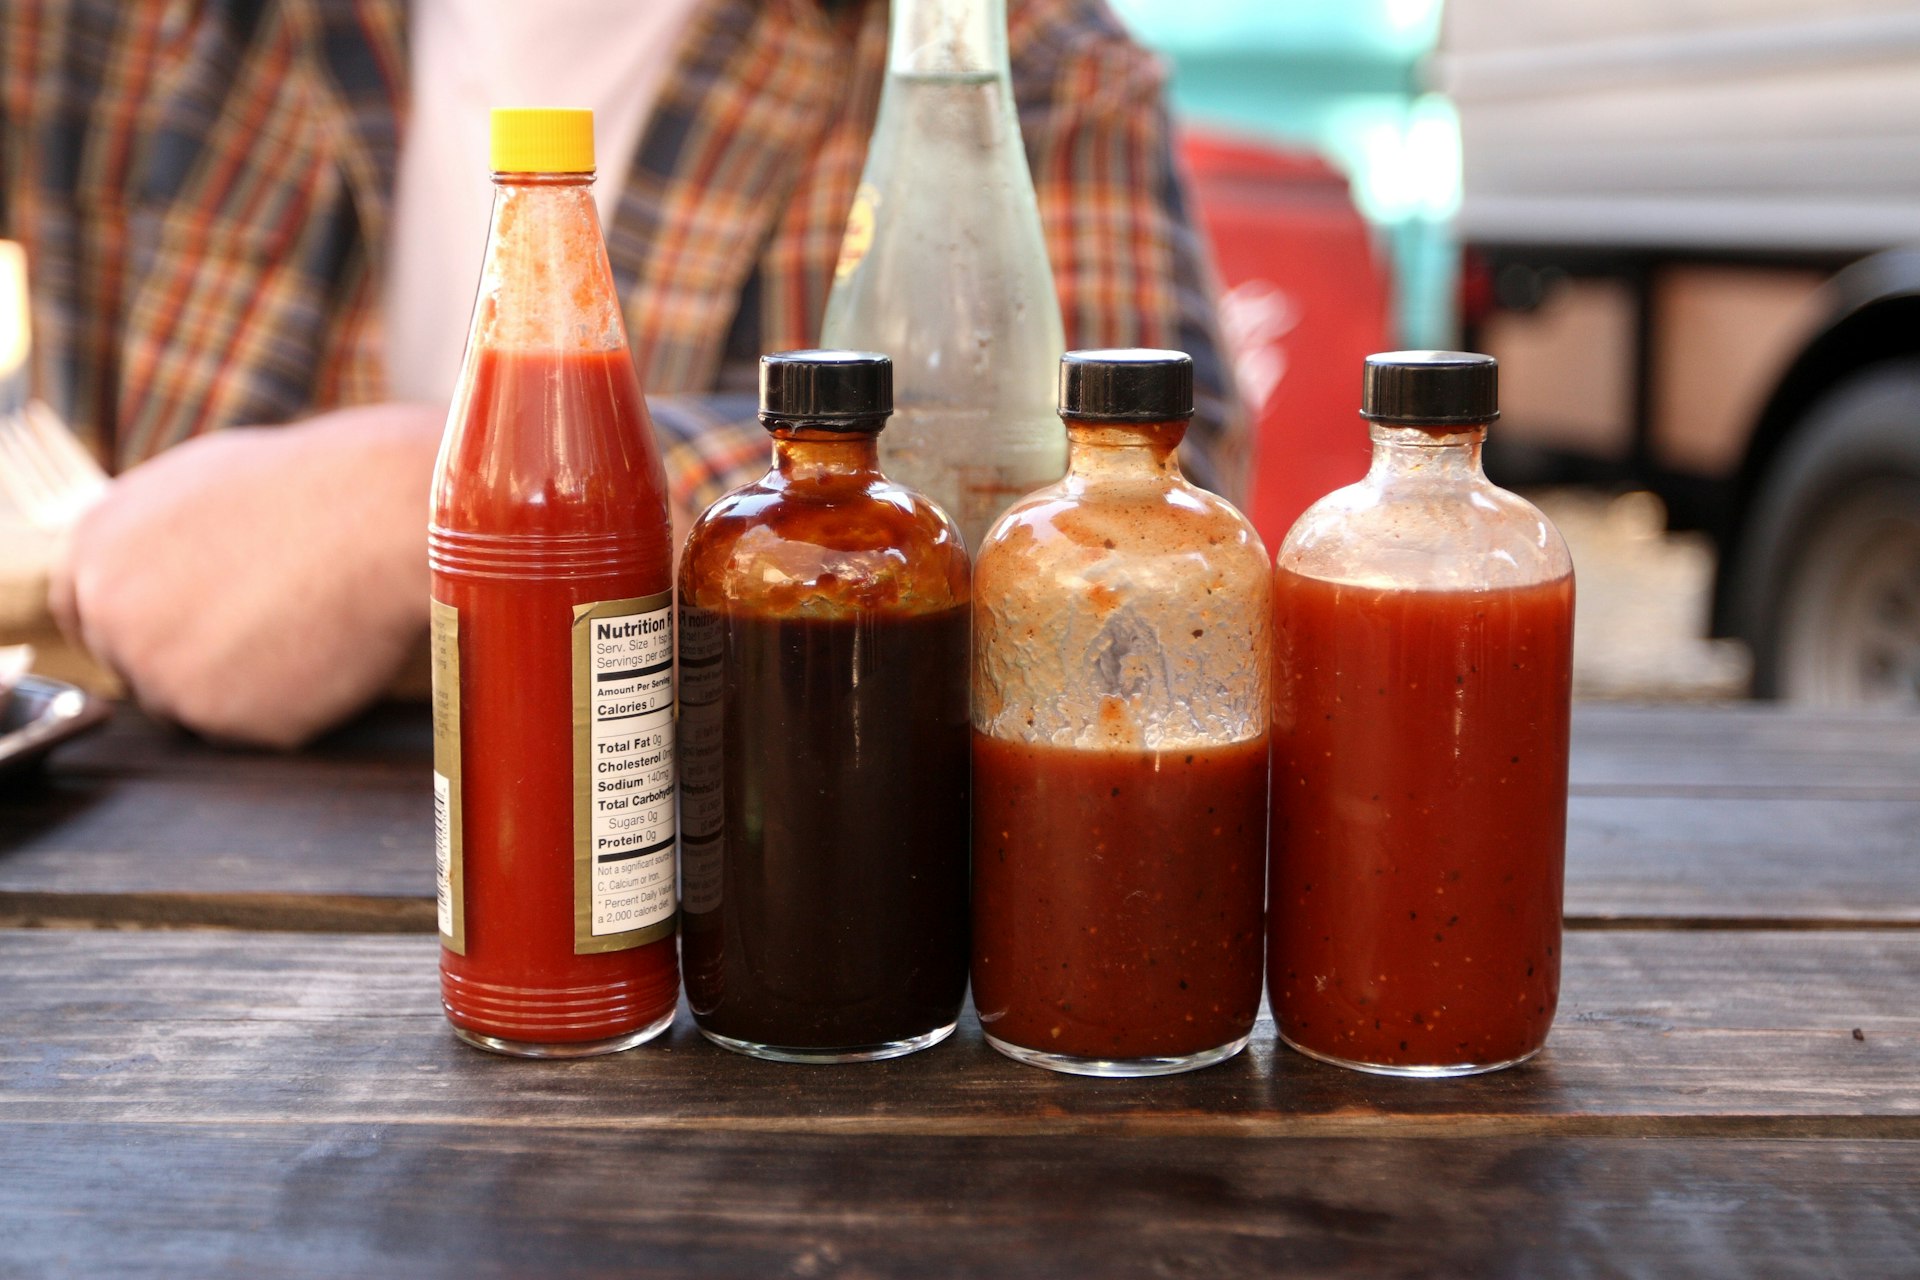 Choice of sauce at a barbecue in Austin. Image by jennifer m. ramos / Getty